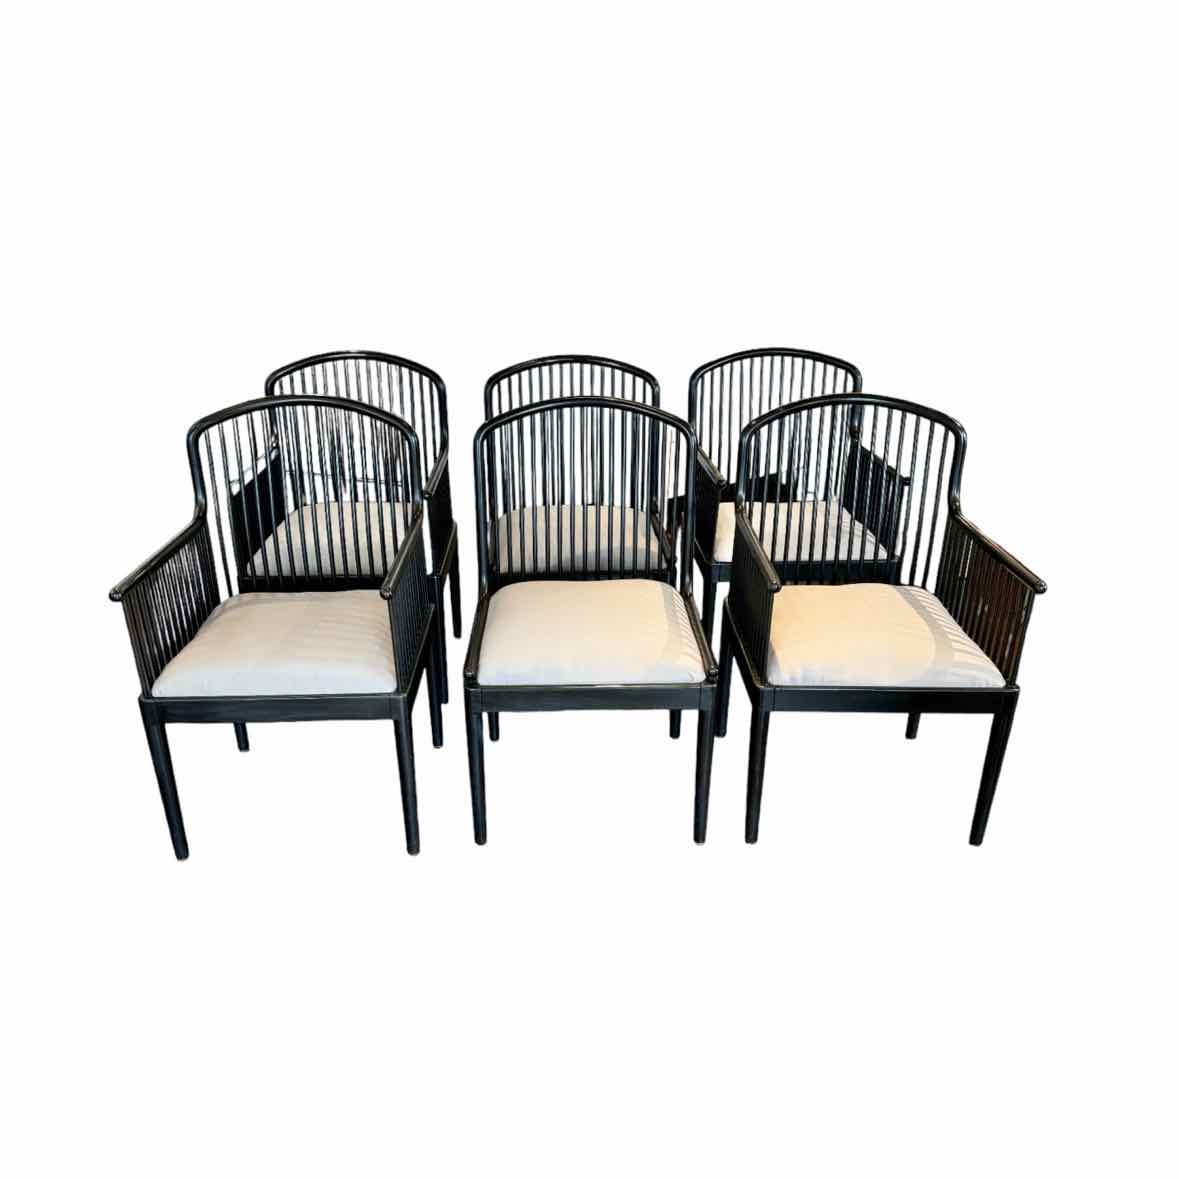 Set of 6 'Andover' Chairs by Davis Allen for Stendig, Italy